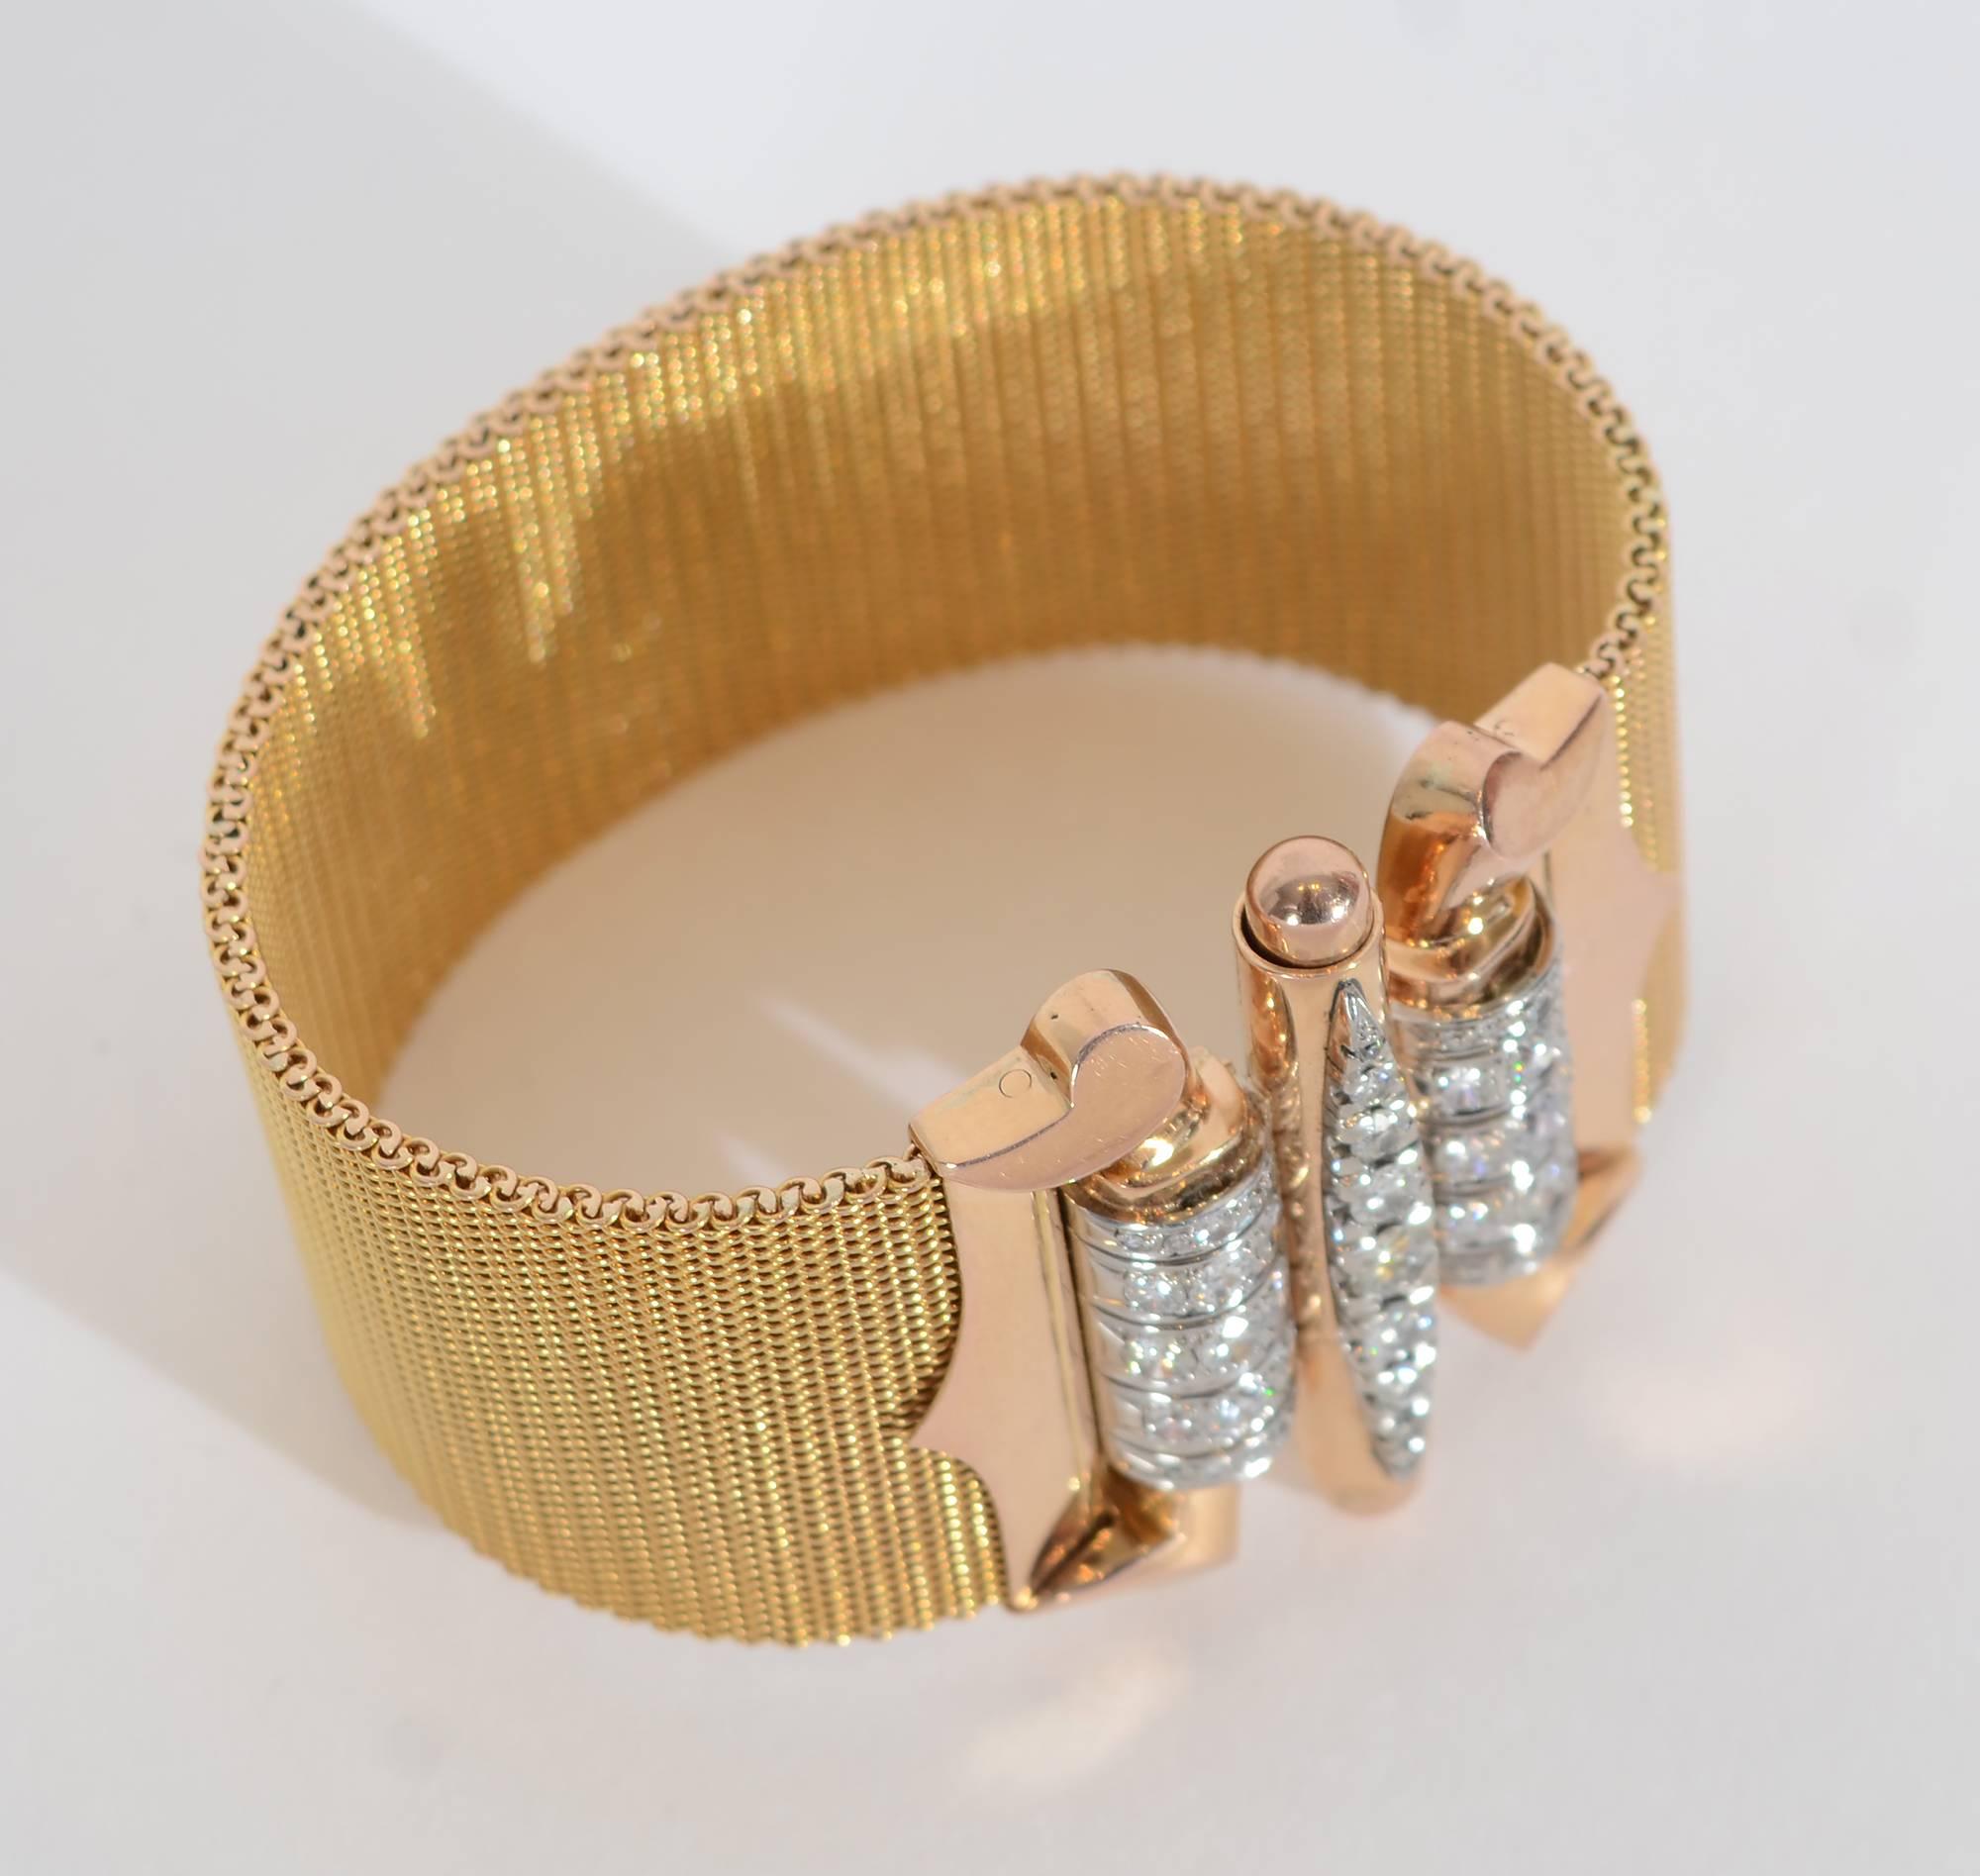 This glamorous 18 karat gold bracelet makes a stunning Retro statement. It is made of very intricately woven tiny links of yellow gold. The buckle is rose gold with four carats of diamonds. The bracelet is 7 inches in length. The body of the